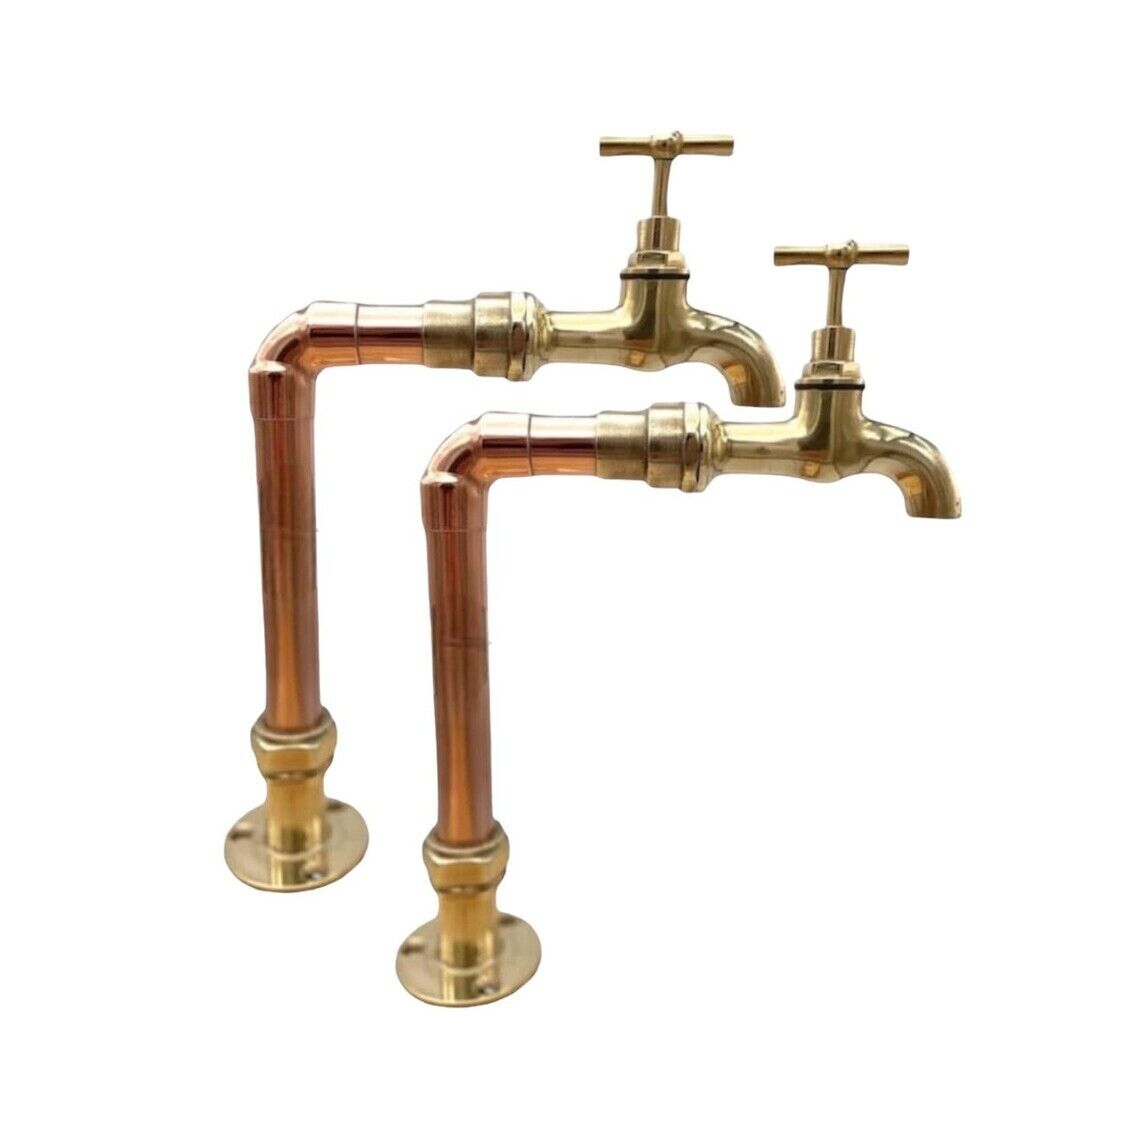 Pair of copper and brass handmade taps for sale